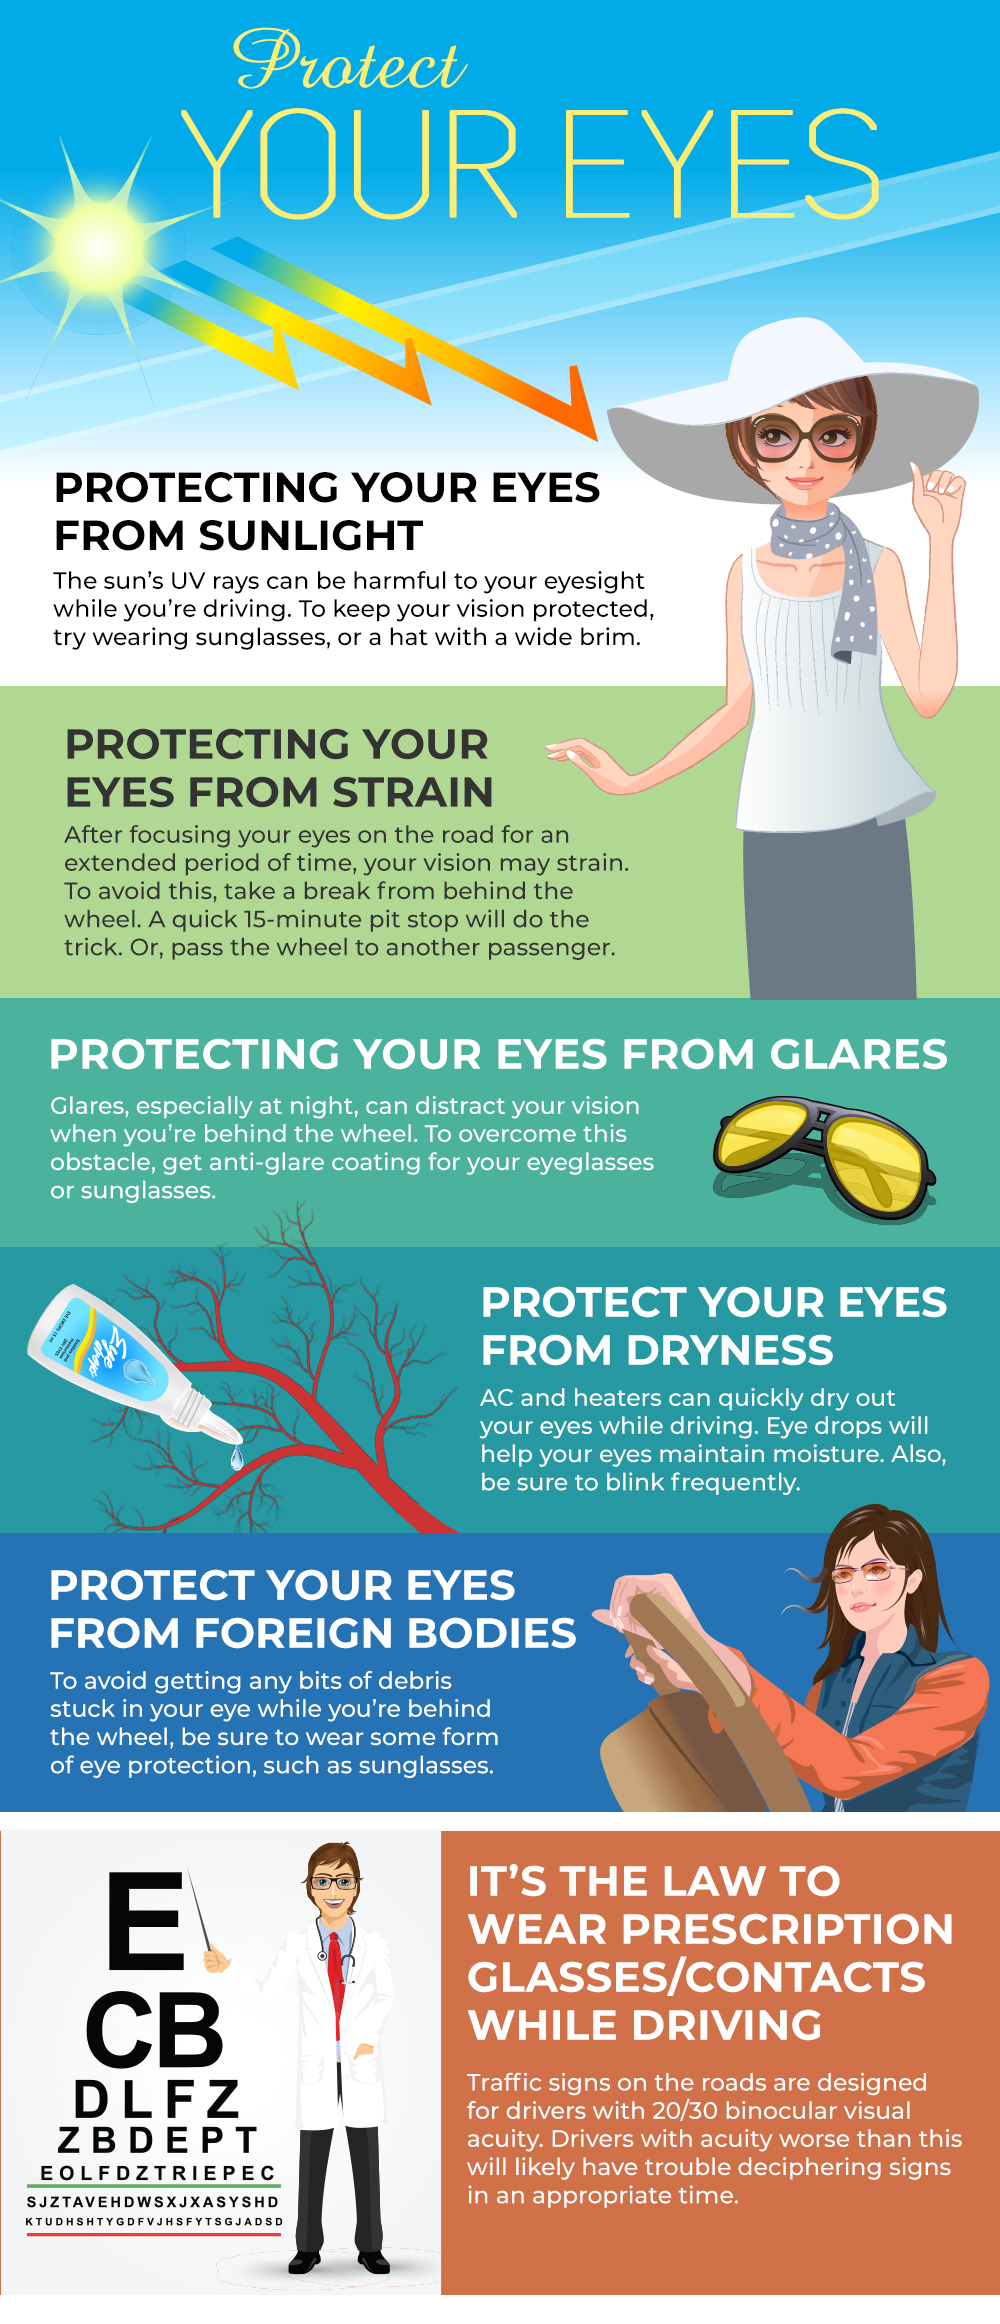 Protect your eyes from the sun's UV rays > MacDill Air Force Base